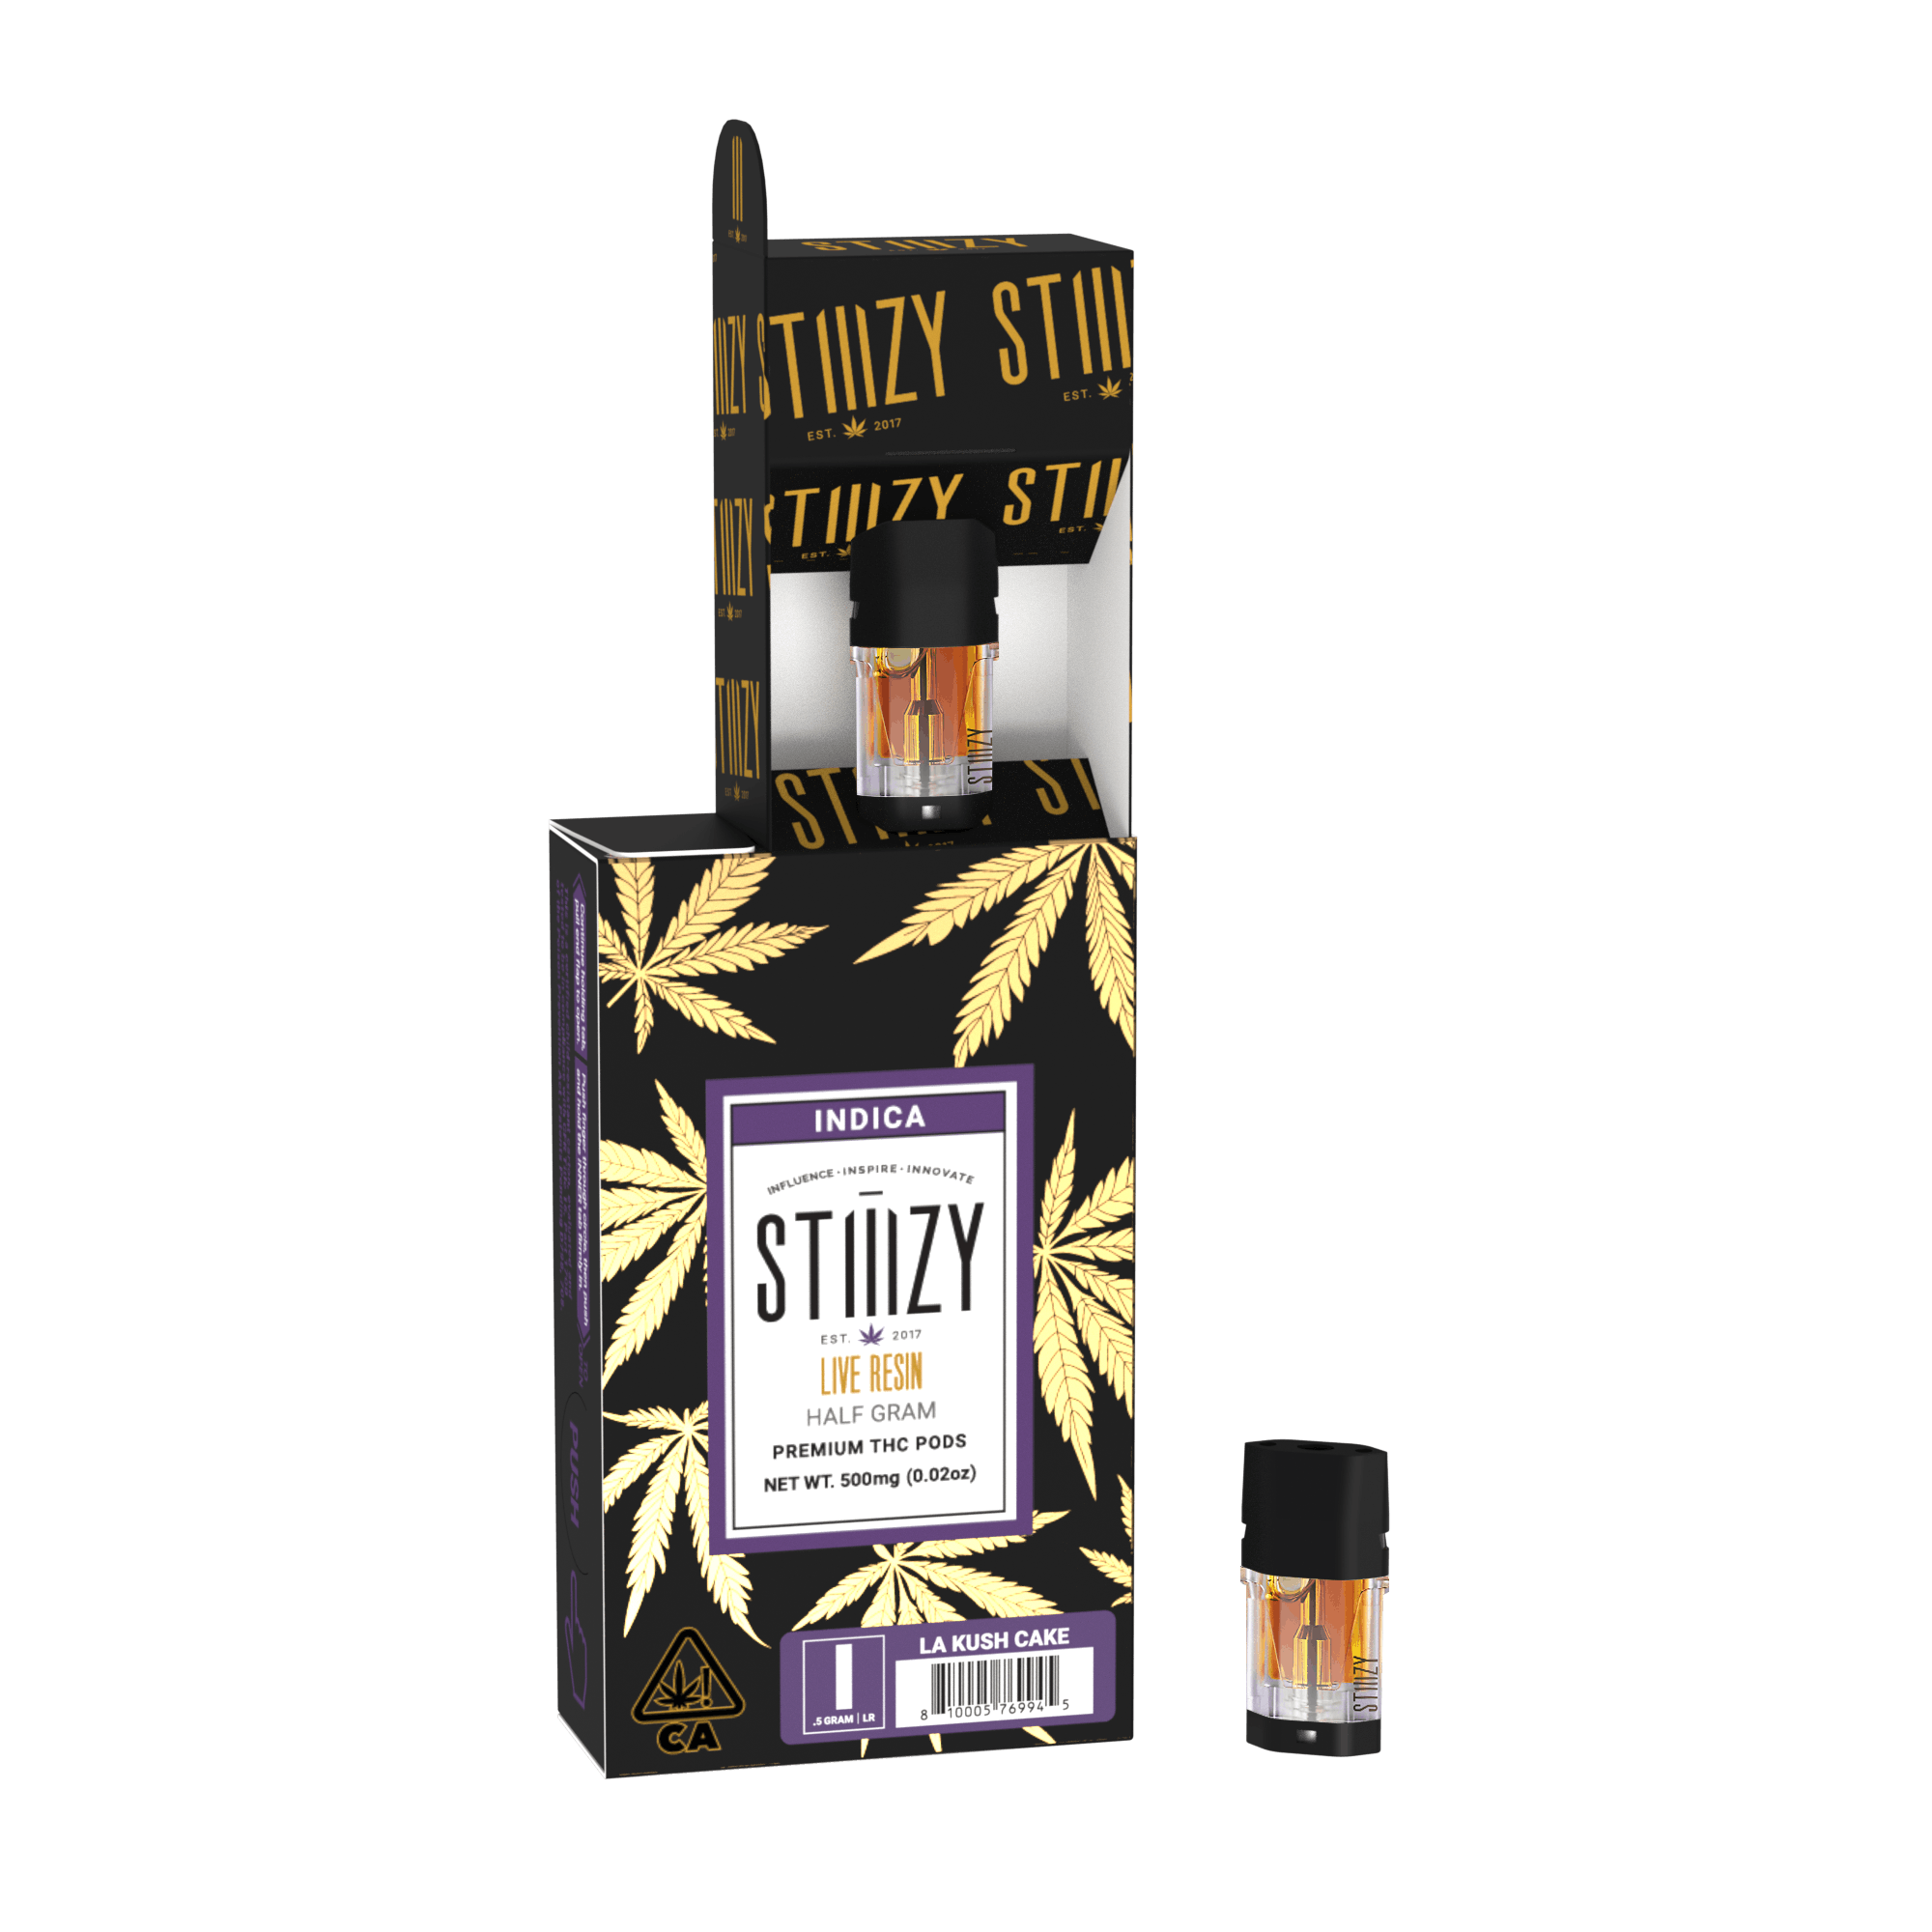 Weed vape pods with live resin derived from flower of the LA Kush Cake strain are showcased with their black and gold box.